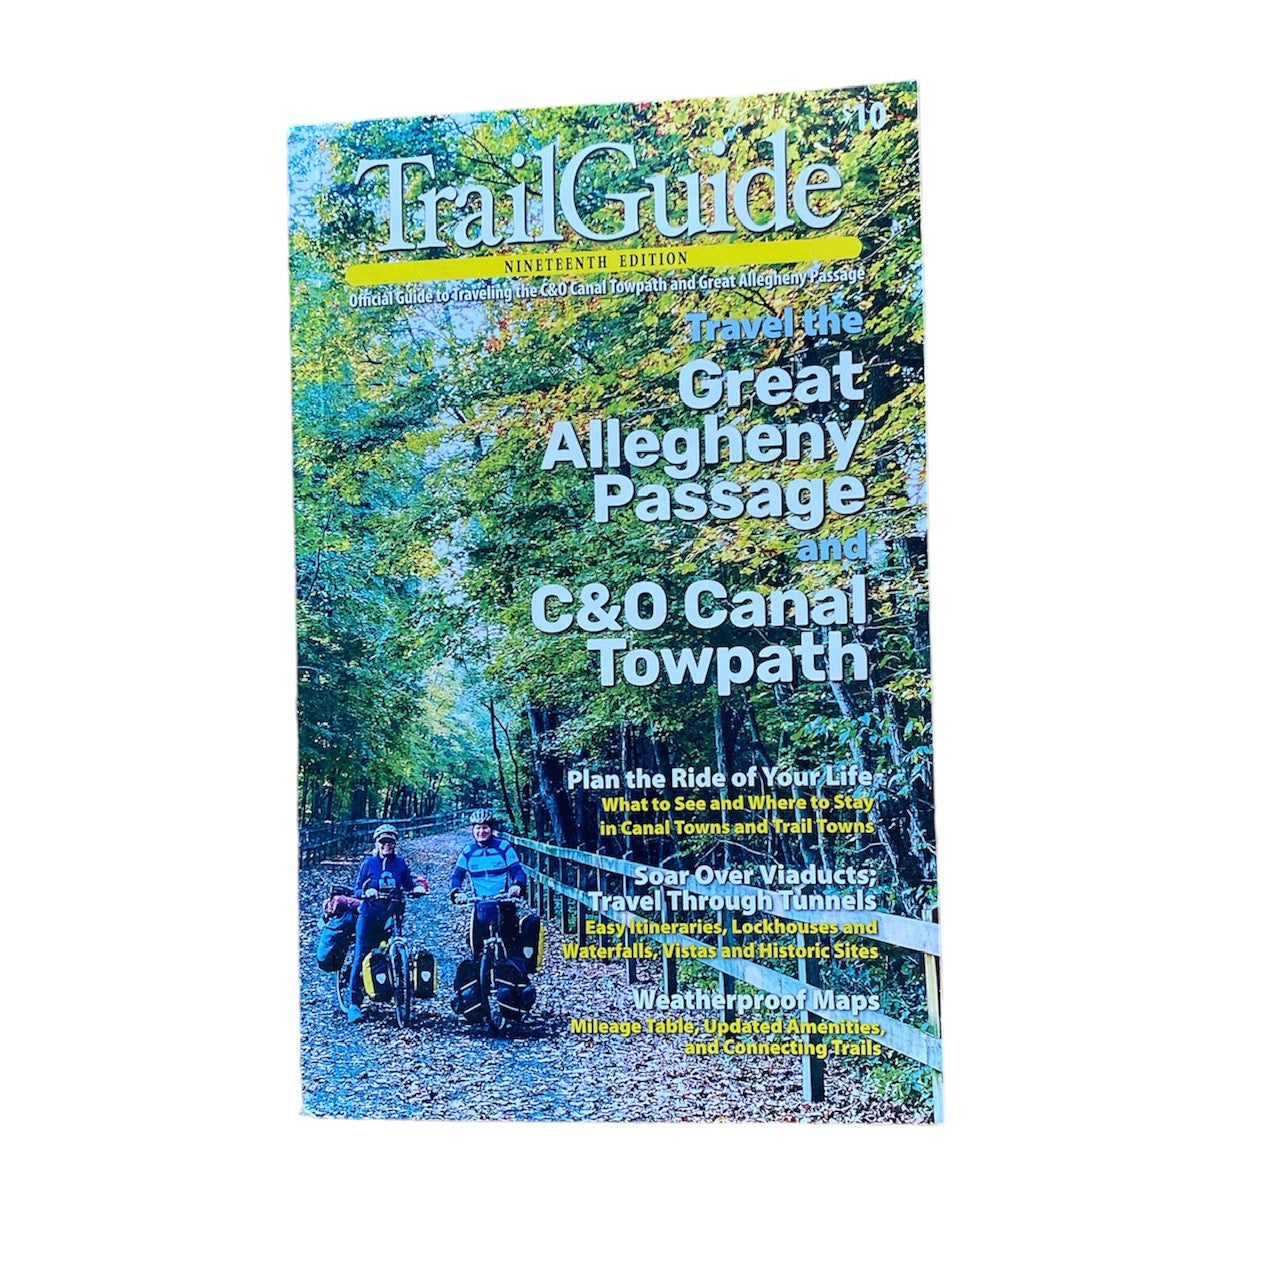 GAP and C&O Canal Trail Guide